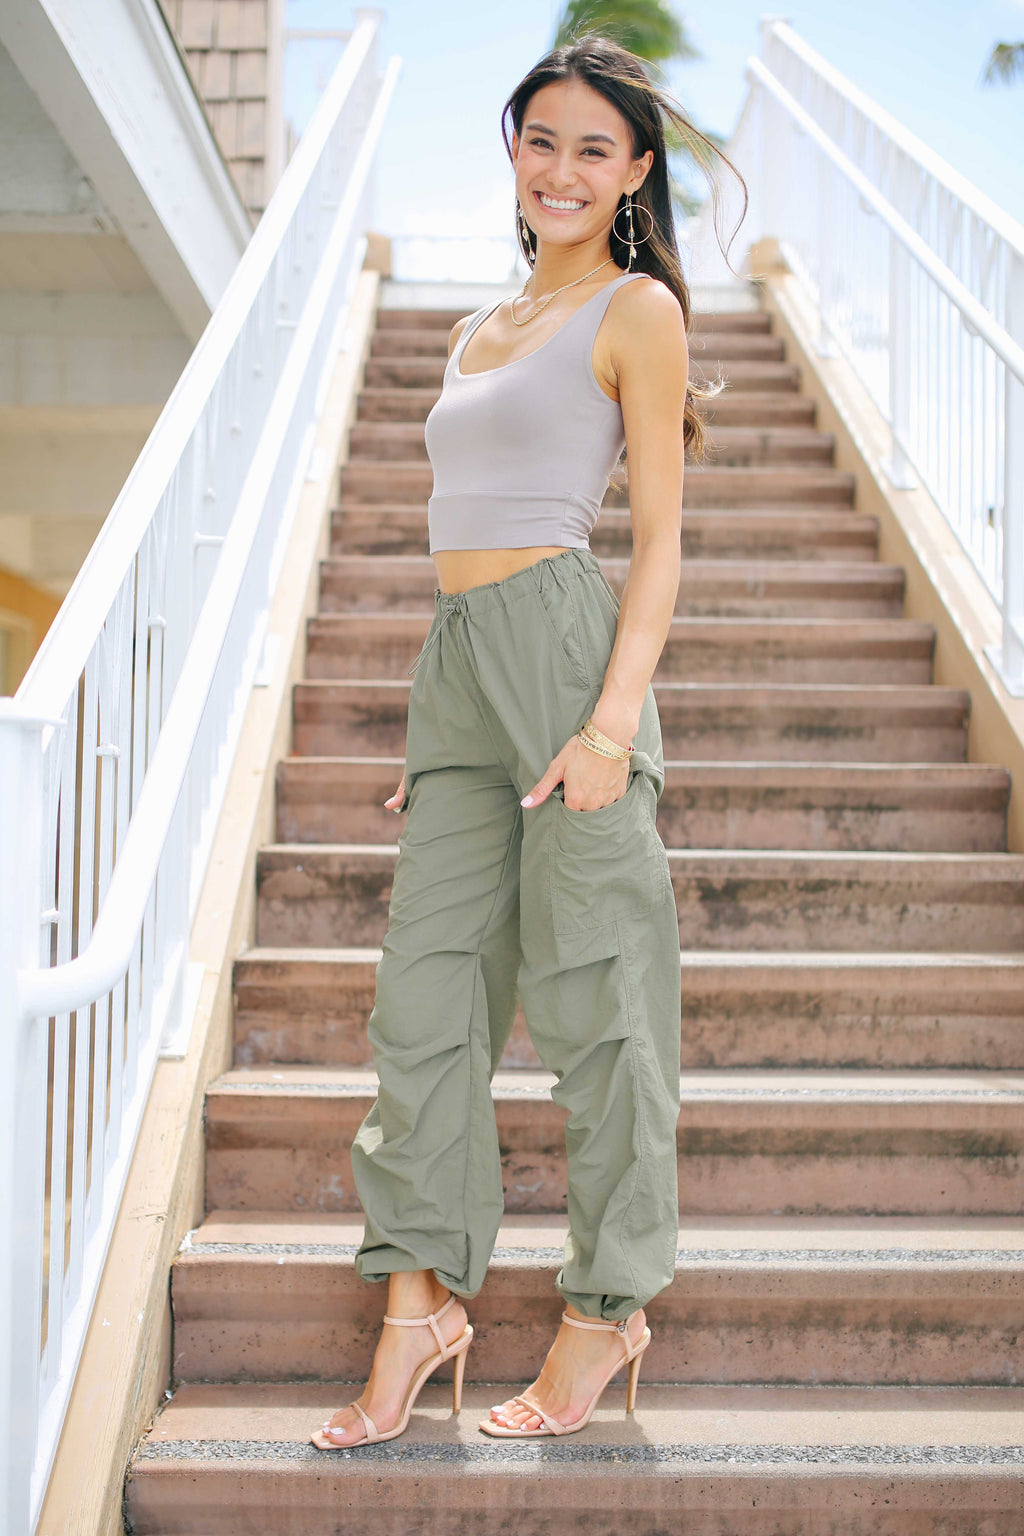 Get On My Level Parachute Pants, 53% OFF